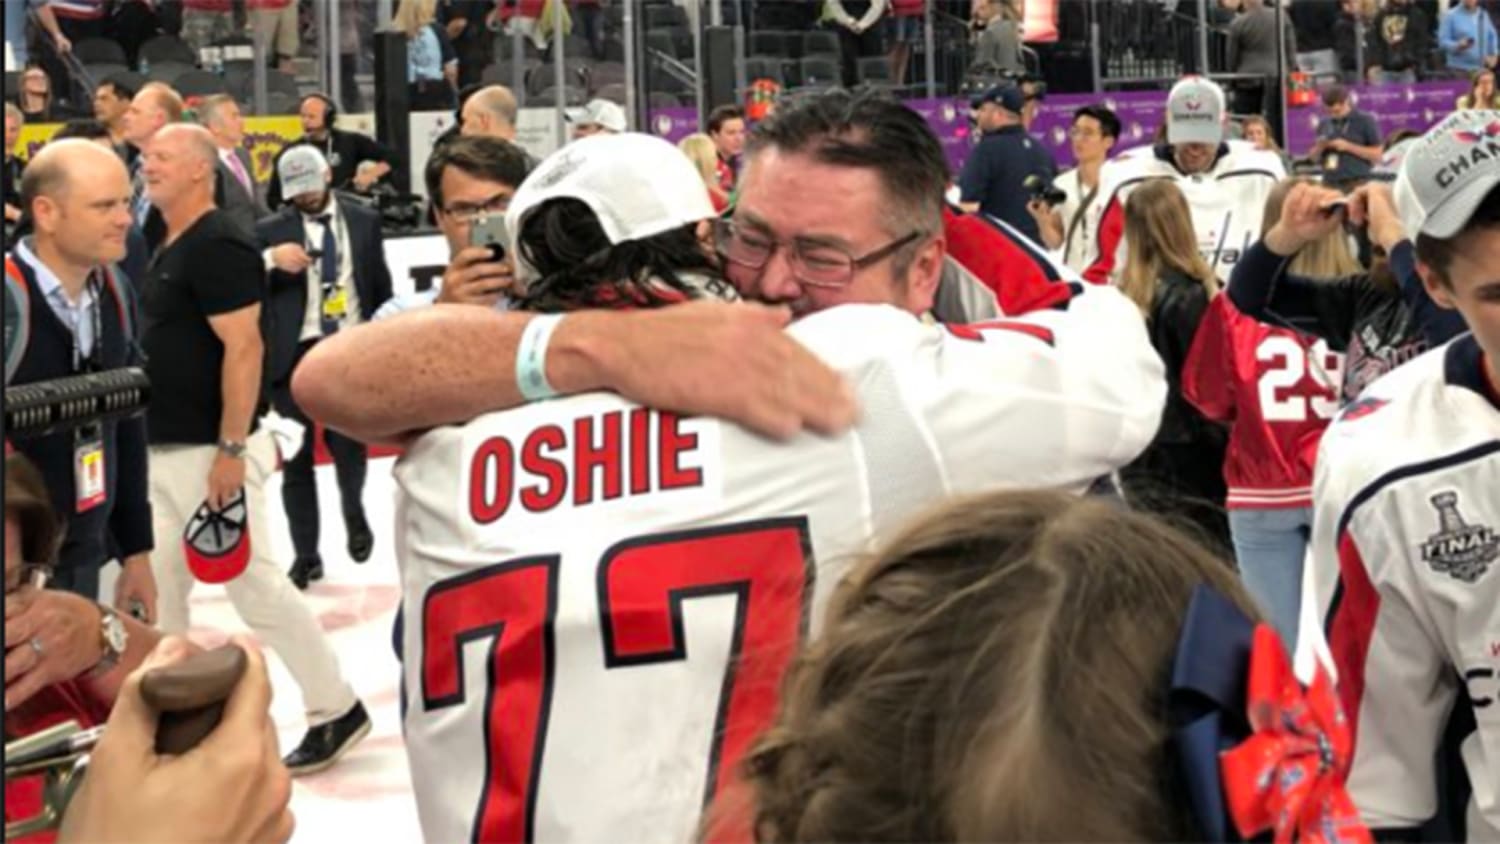 Mount Vernon's T.J. Oshie shares Stanley Cup with Alzheimer's-afflicted dad